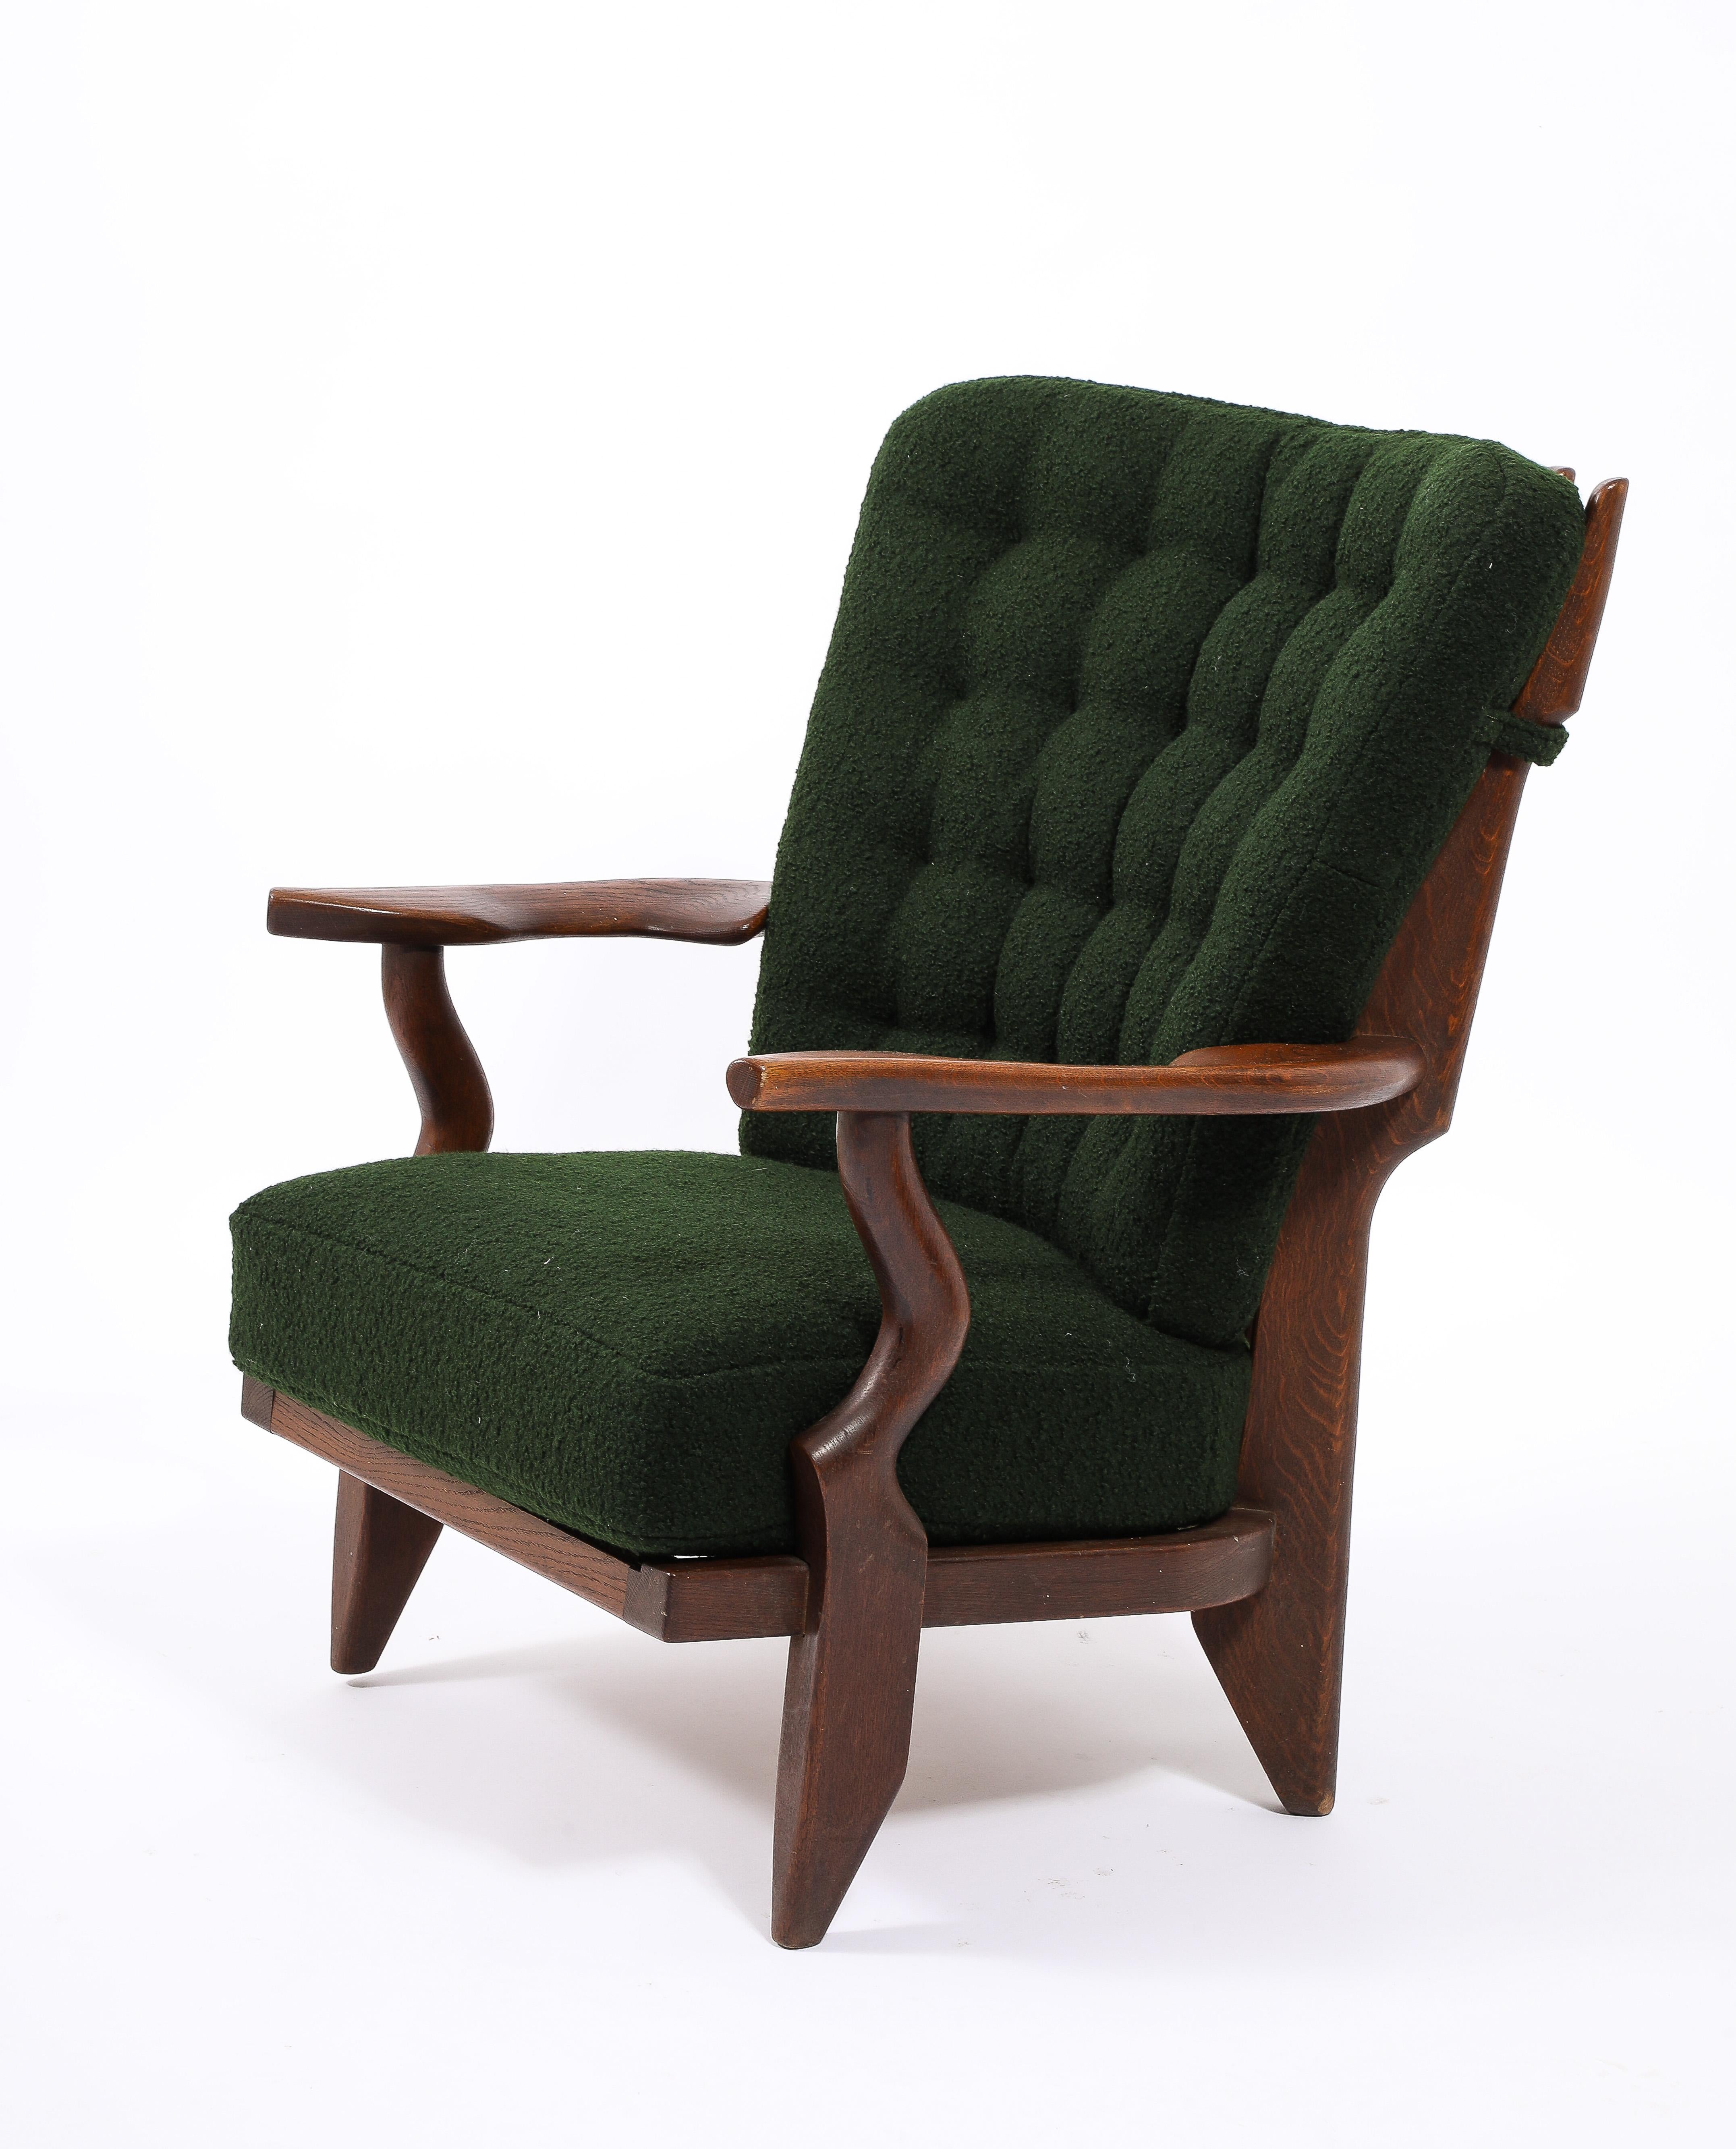 An early example of the petit repos chair in original patina, newly upholstered in a green bouclé.
